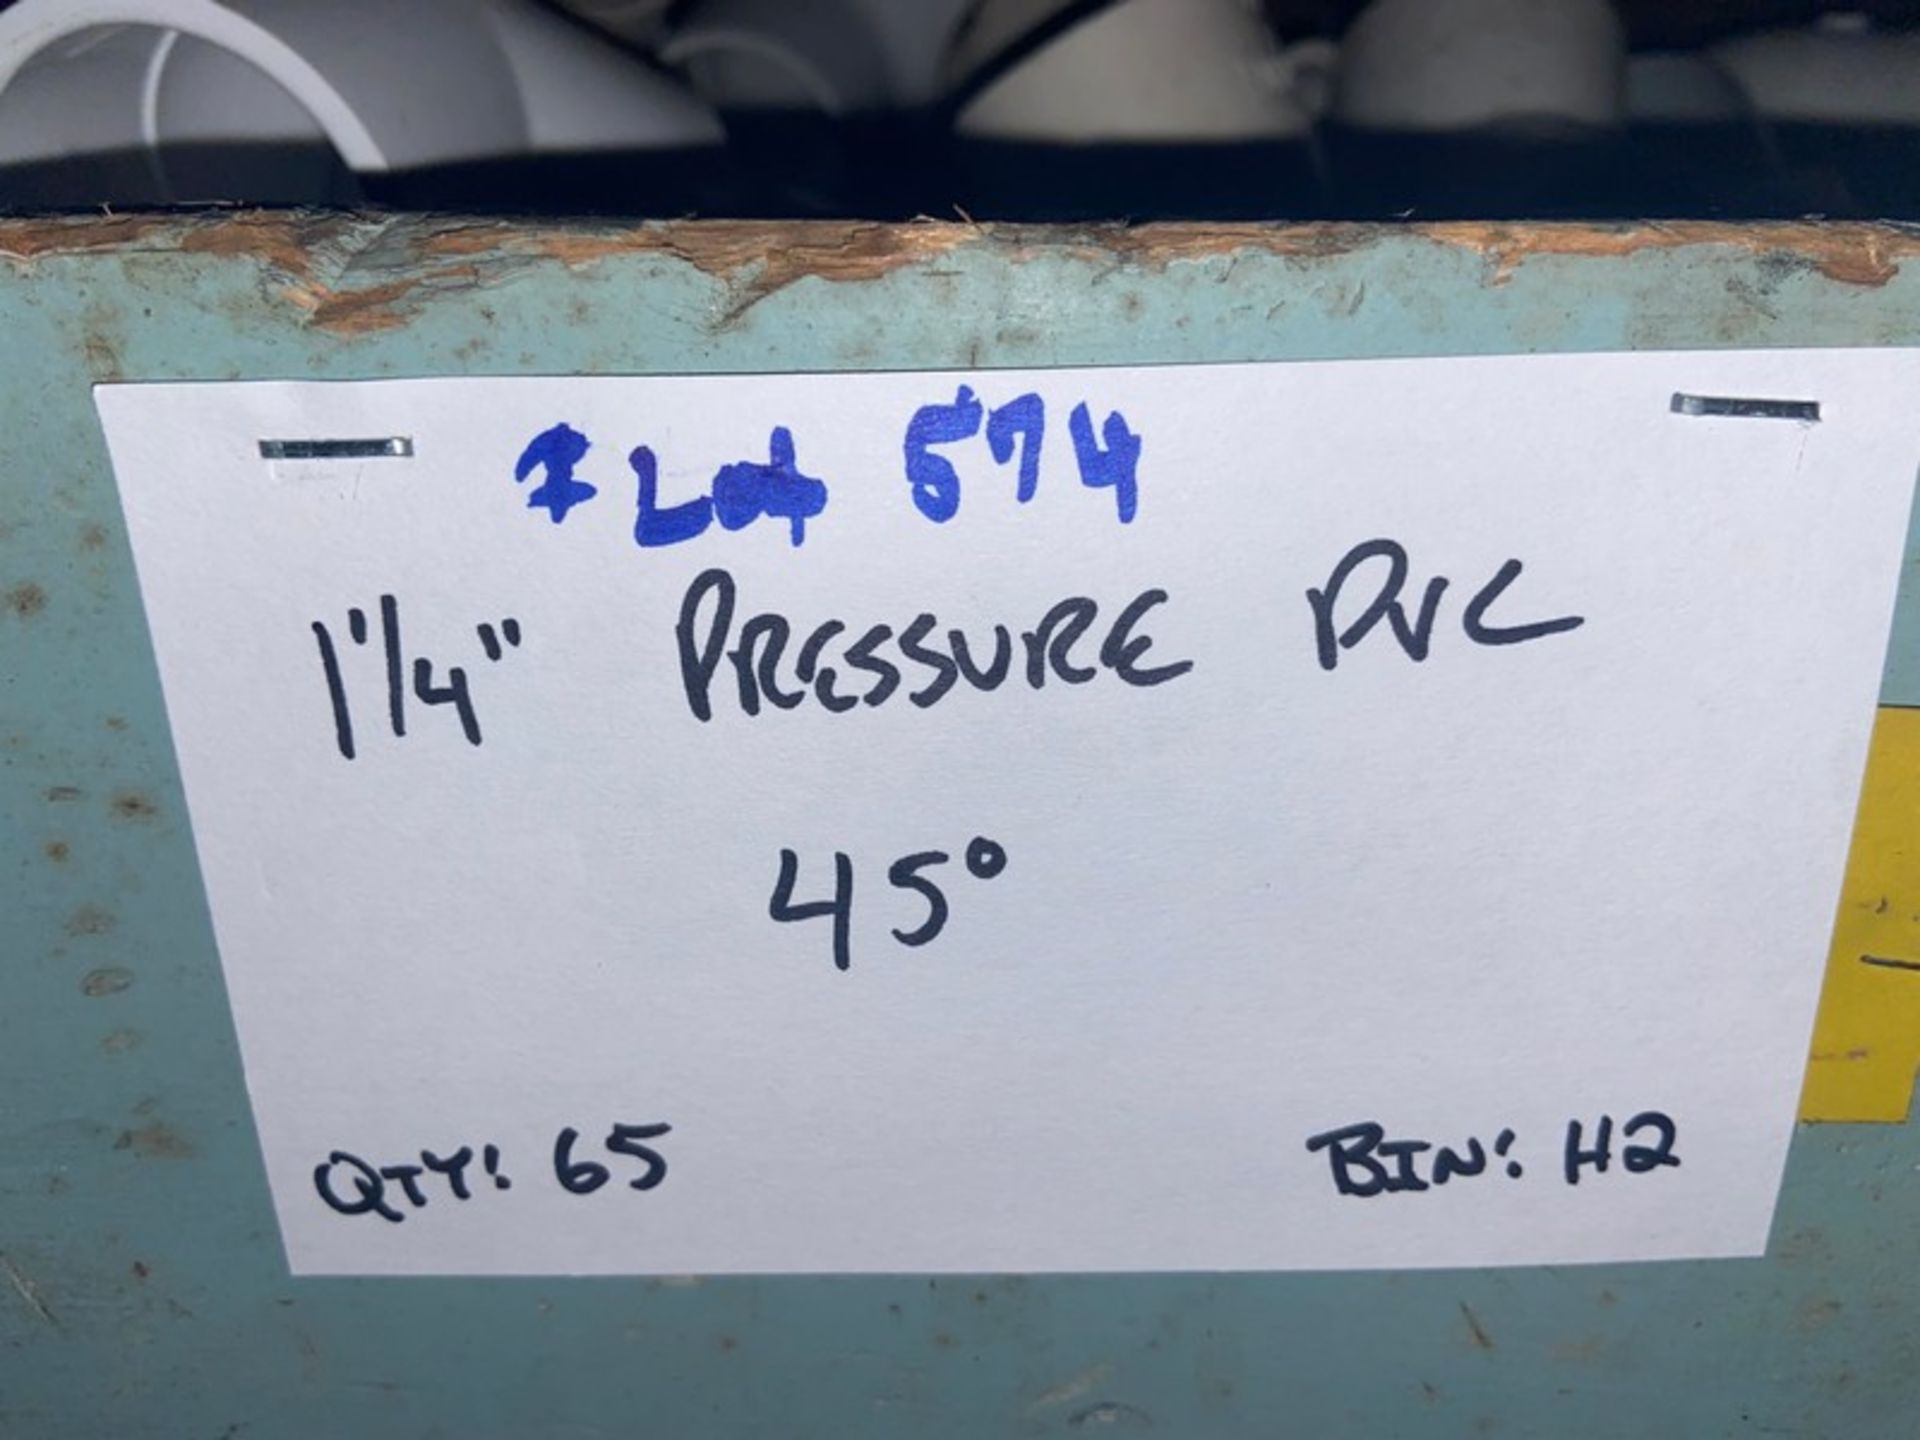 (65) 1 1/4”Pressure PVC 45’ (Bin: H2)(LOCATED IN MONROEVILLE, PA) - Image 5 of 5